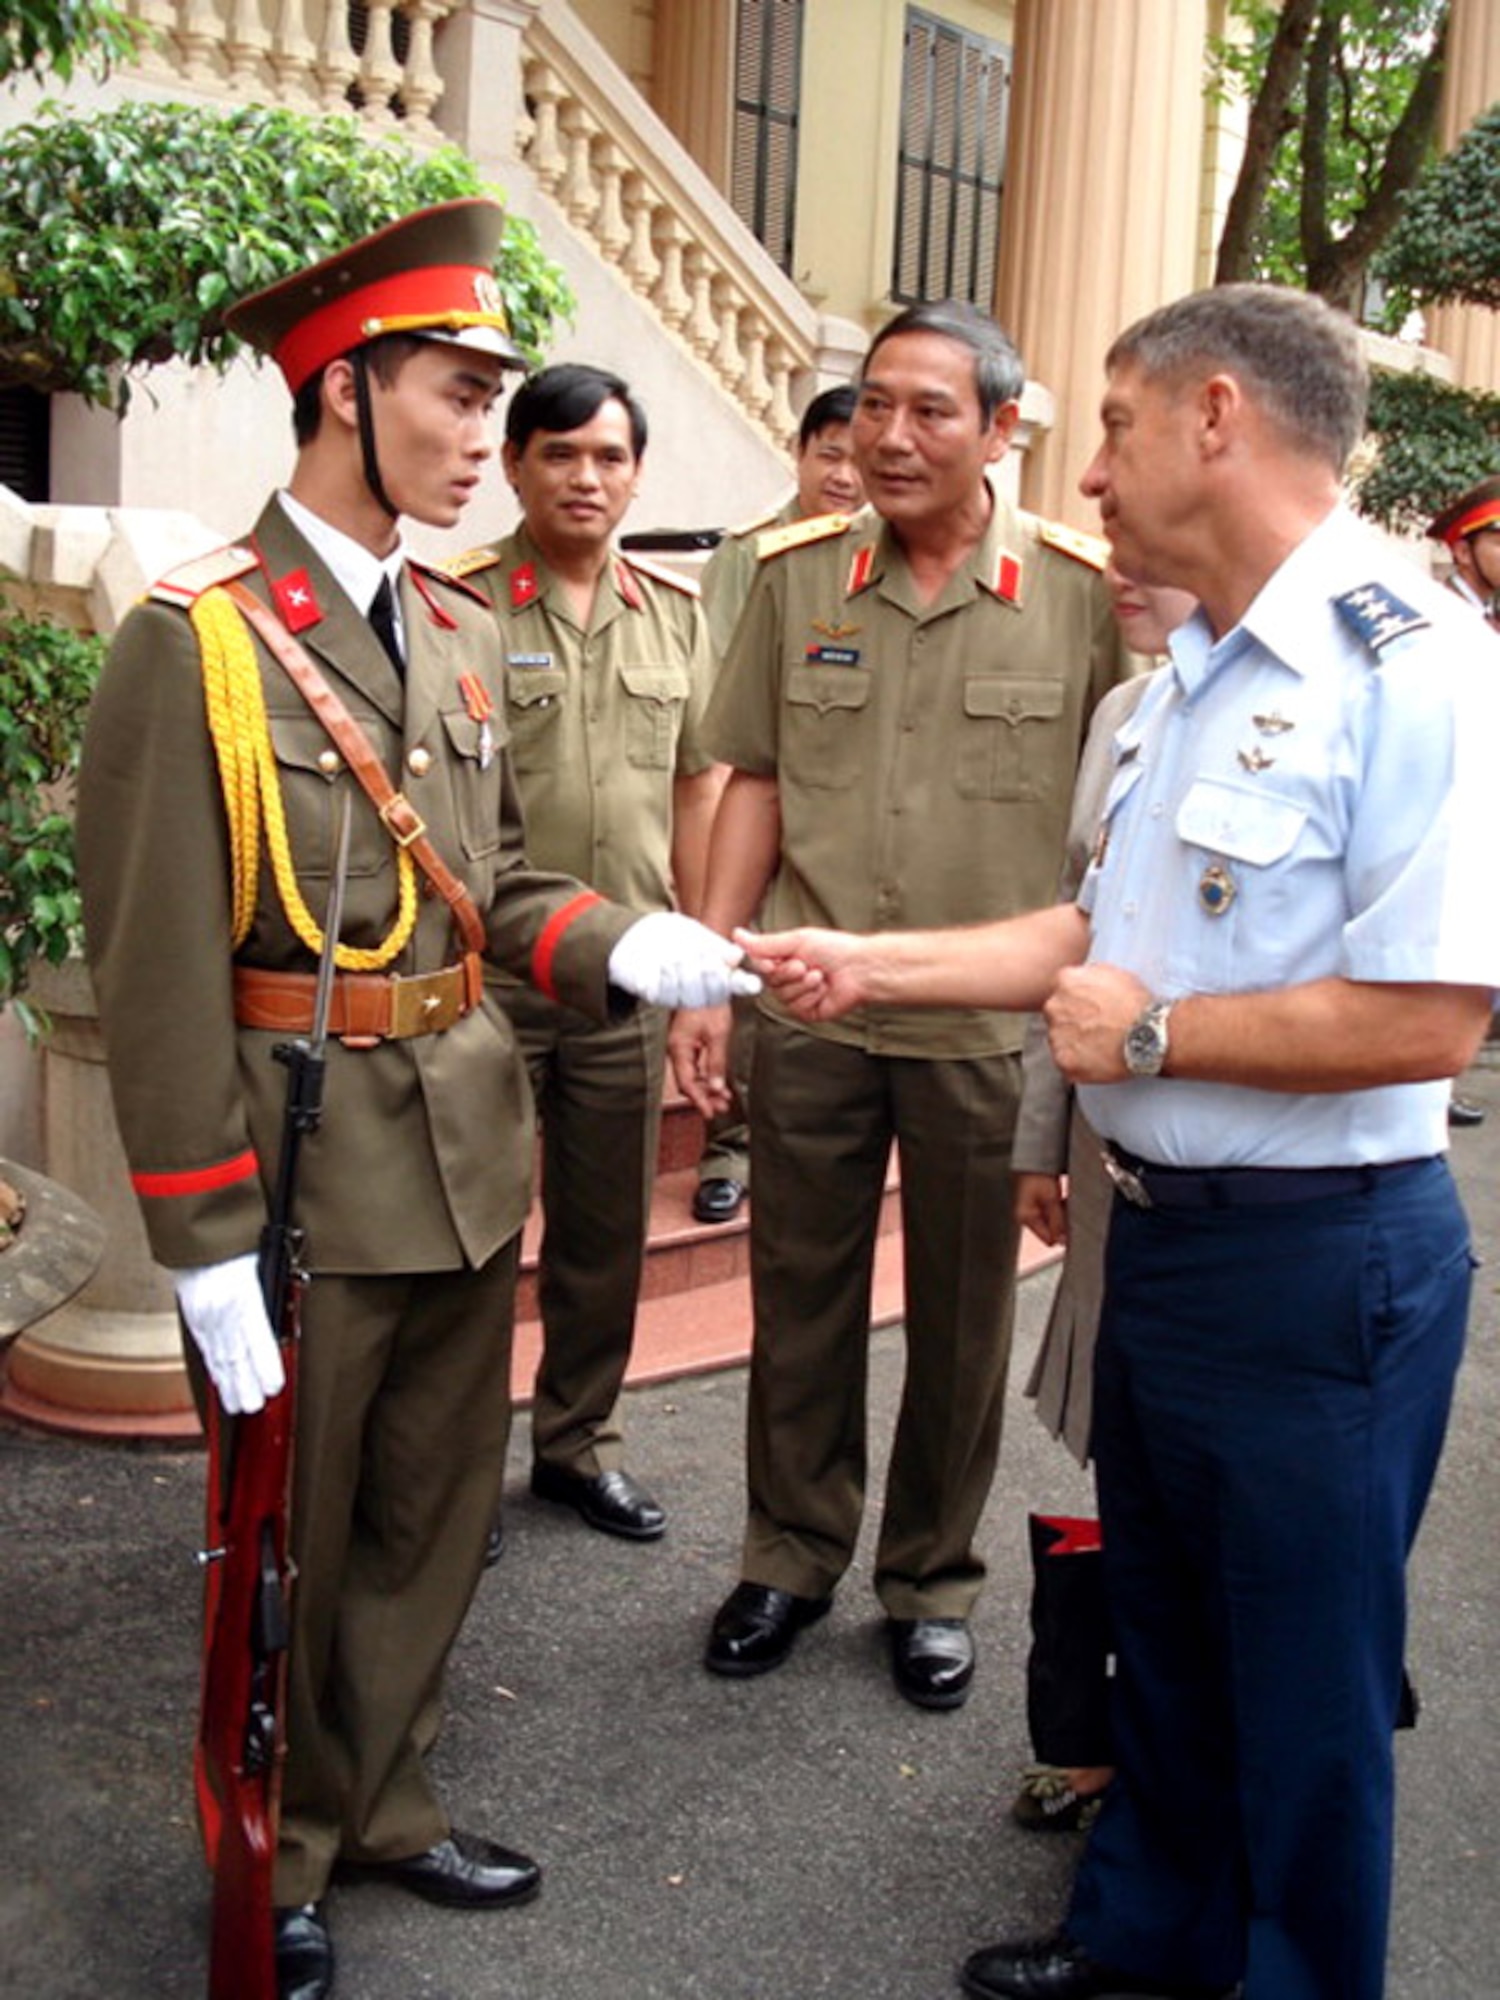 Lt. Gen. Dan Leaf presents a coin to a Vietnamese soldier.  General Leaf was in Vietnam recently to identify possible future military engagement activities.   He is U.S. Pacific Command deputy commander.  (U.S. Air Force photo)